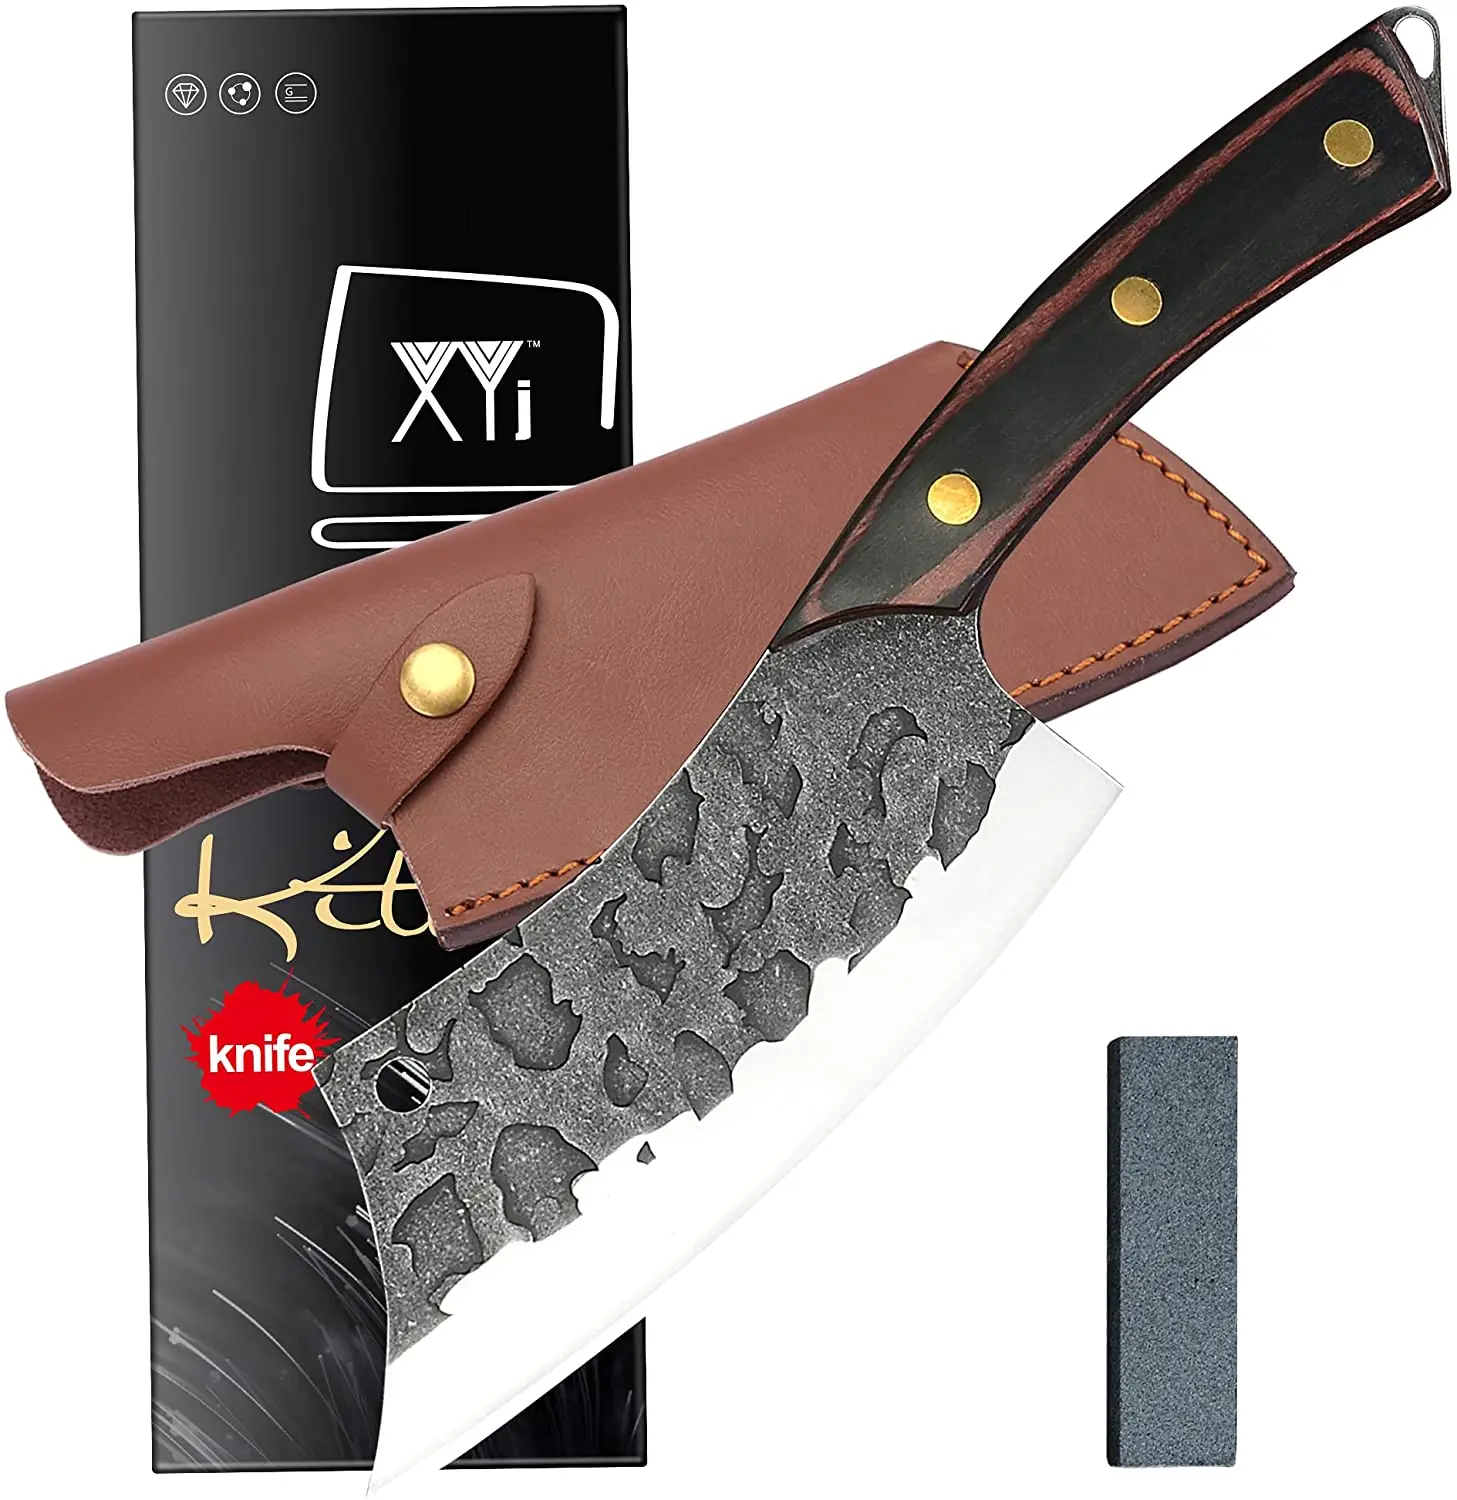 https://ae01.alicdn.com/kf/Hd15046349d254ab881436fcbe27e218bp/XYJ-Full-Tang-6-Inch-Tactical-Chef-Knife-With-Sheath-Stainless-Steel-Meat-Vegetable-Knives-Camping.jpg